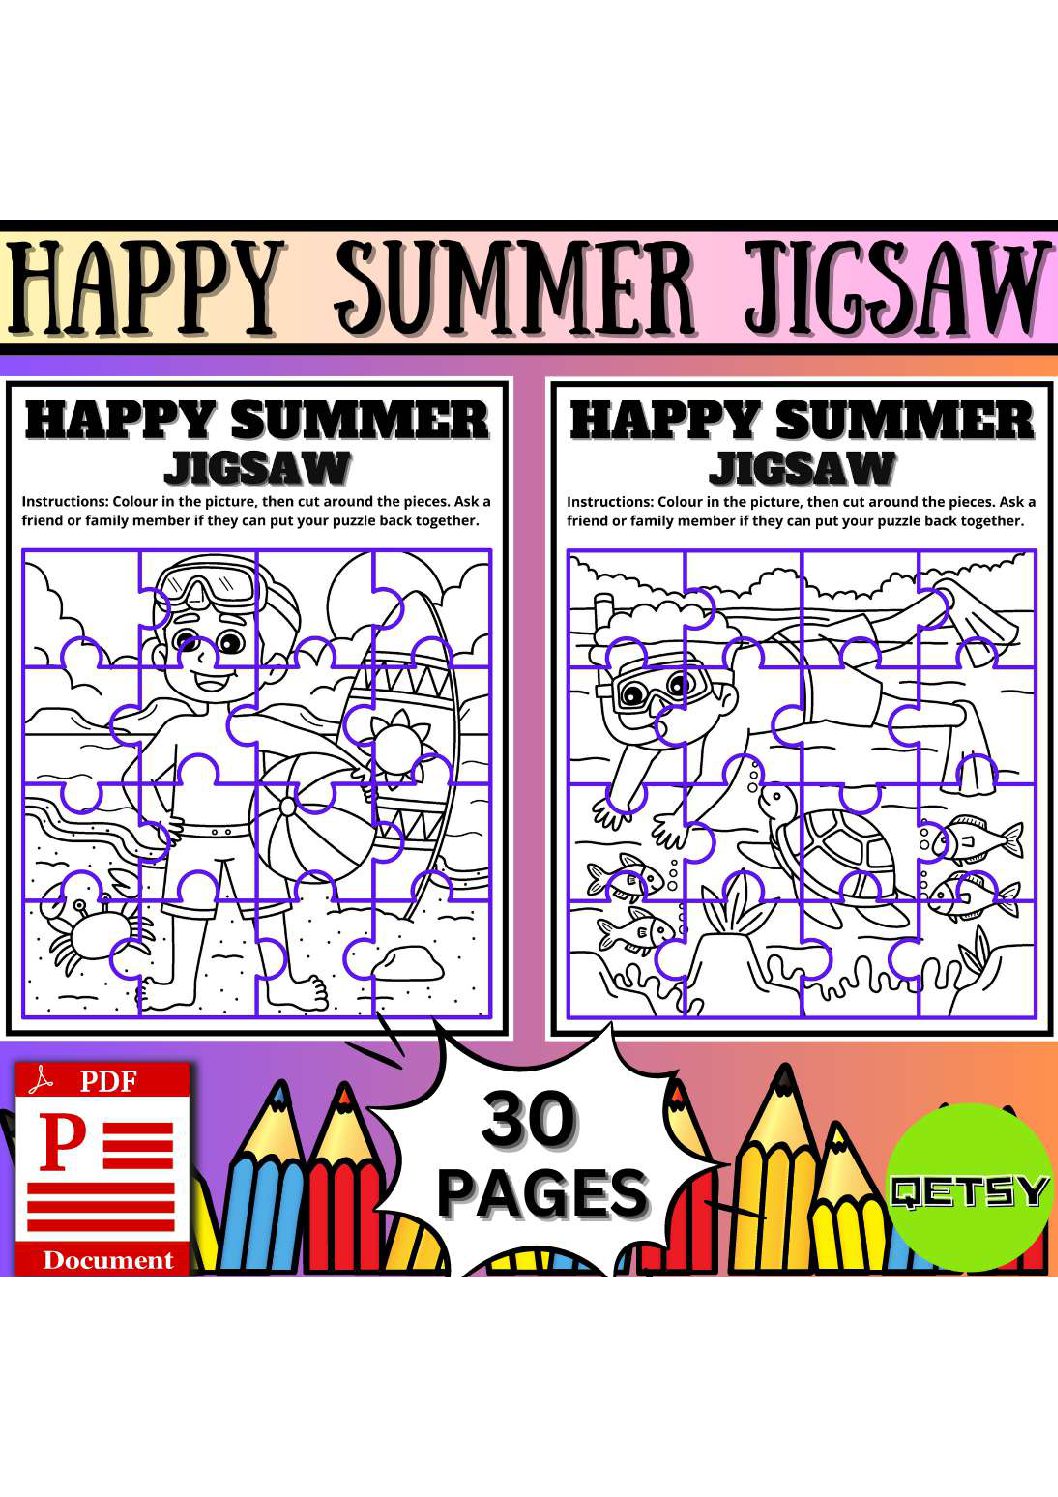 Sunny summer happy summer jigsaw coloring puzzles creative relaxing activity â teacha